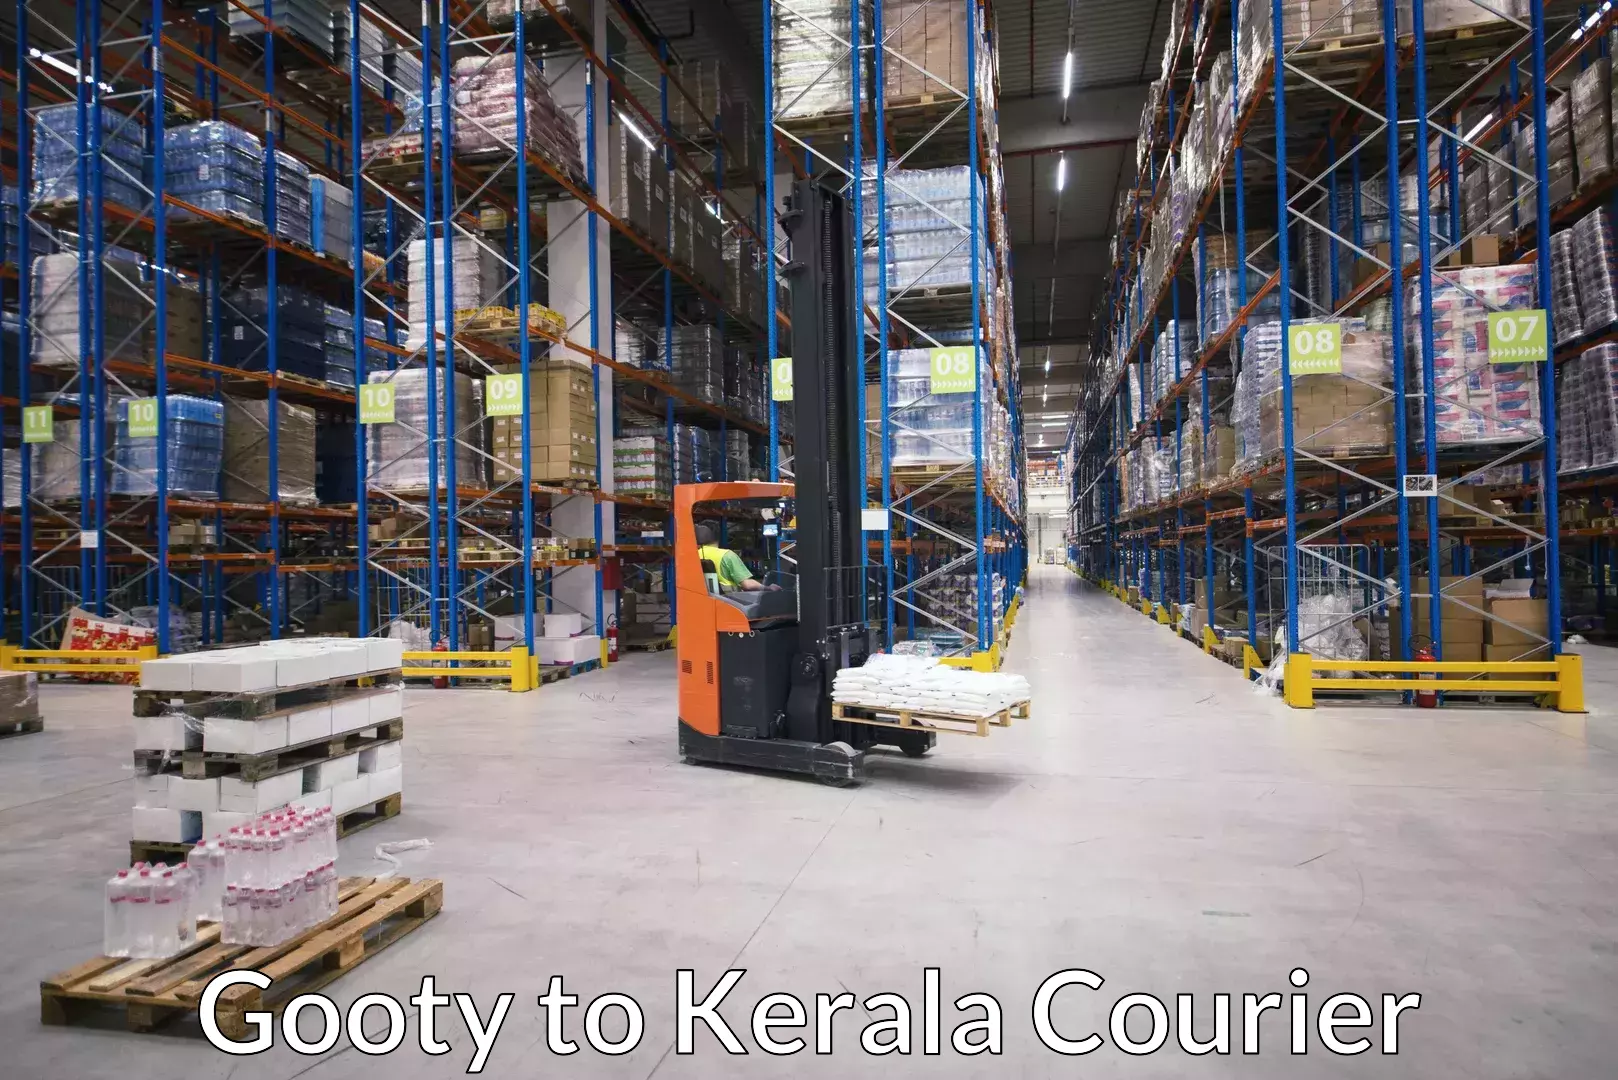 Quick moving services Gooty to Cochin Port Kochi